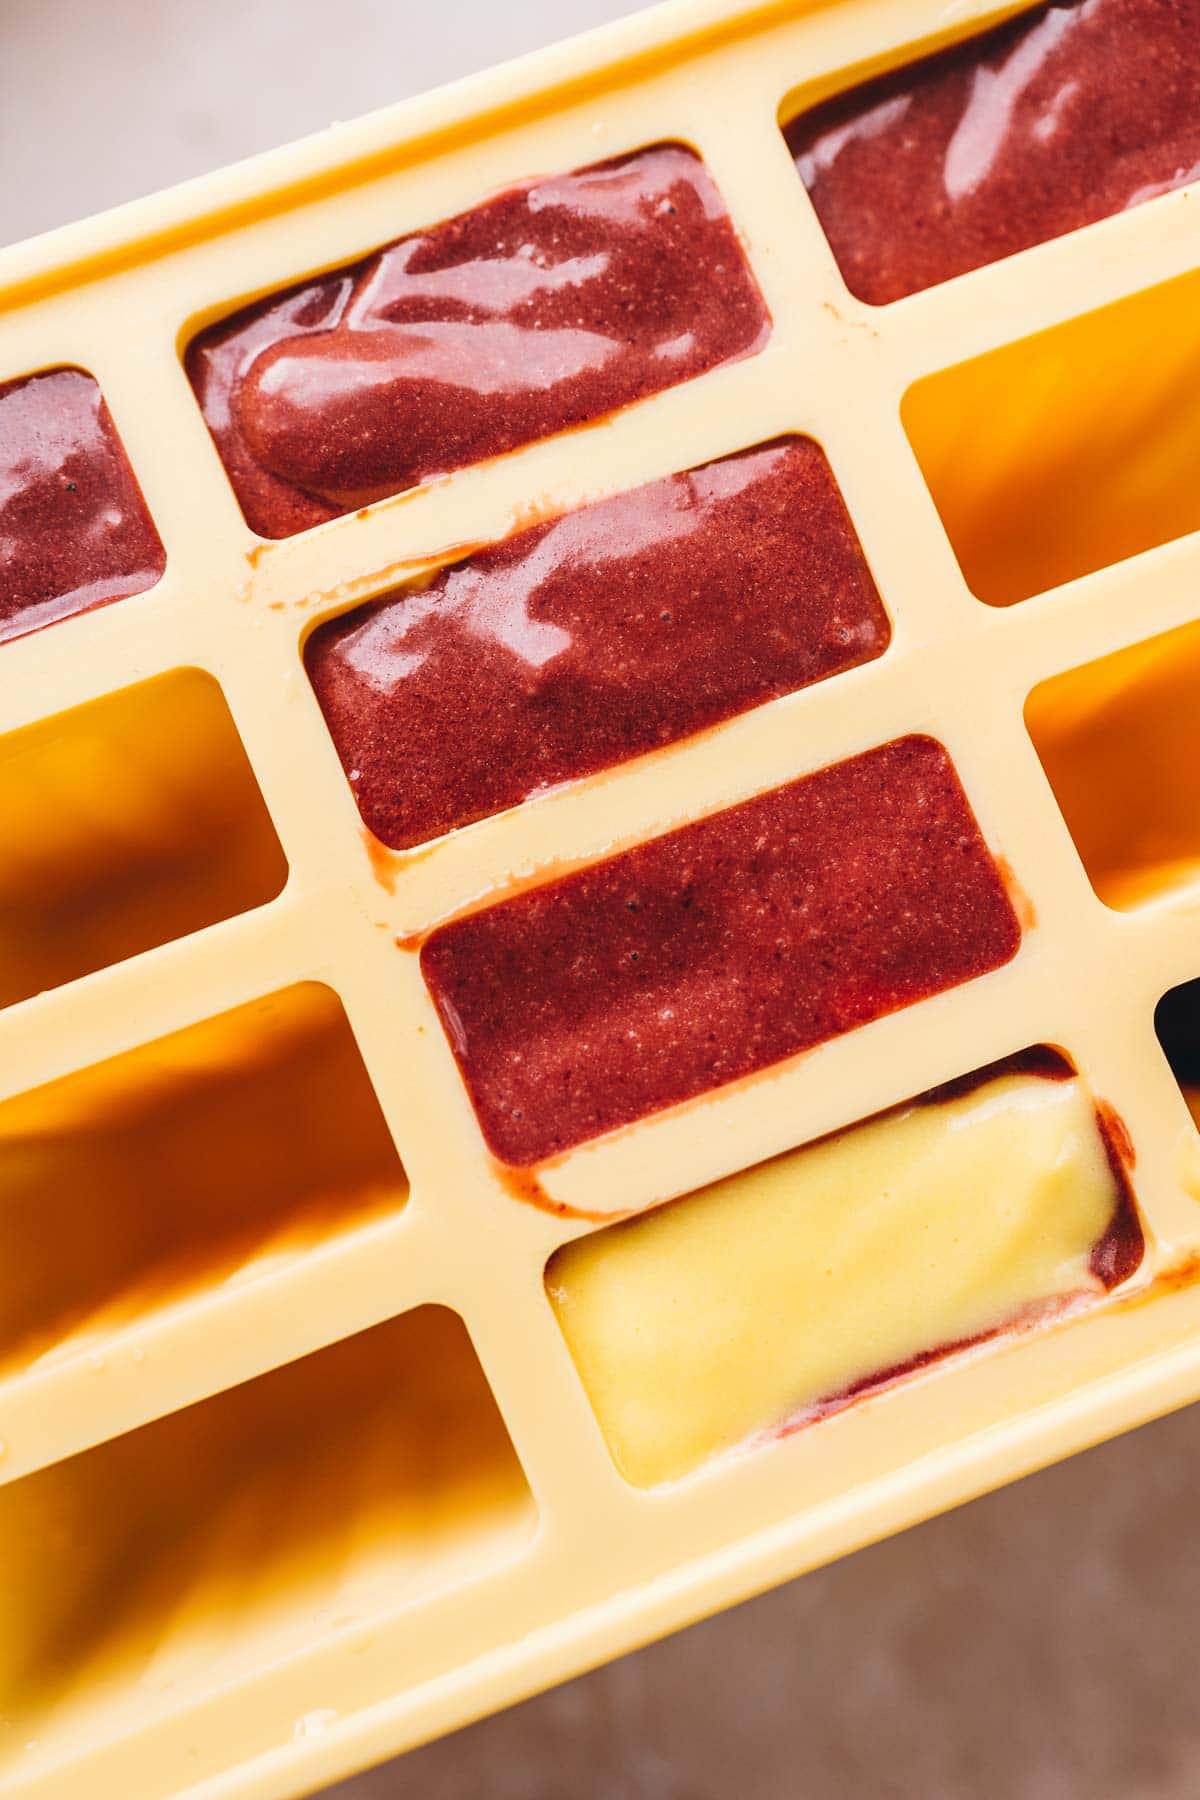 Yellow popsicle molds filled with ice pop mixures.